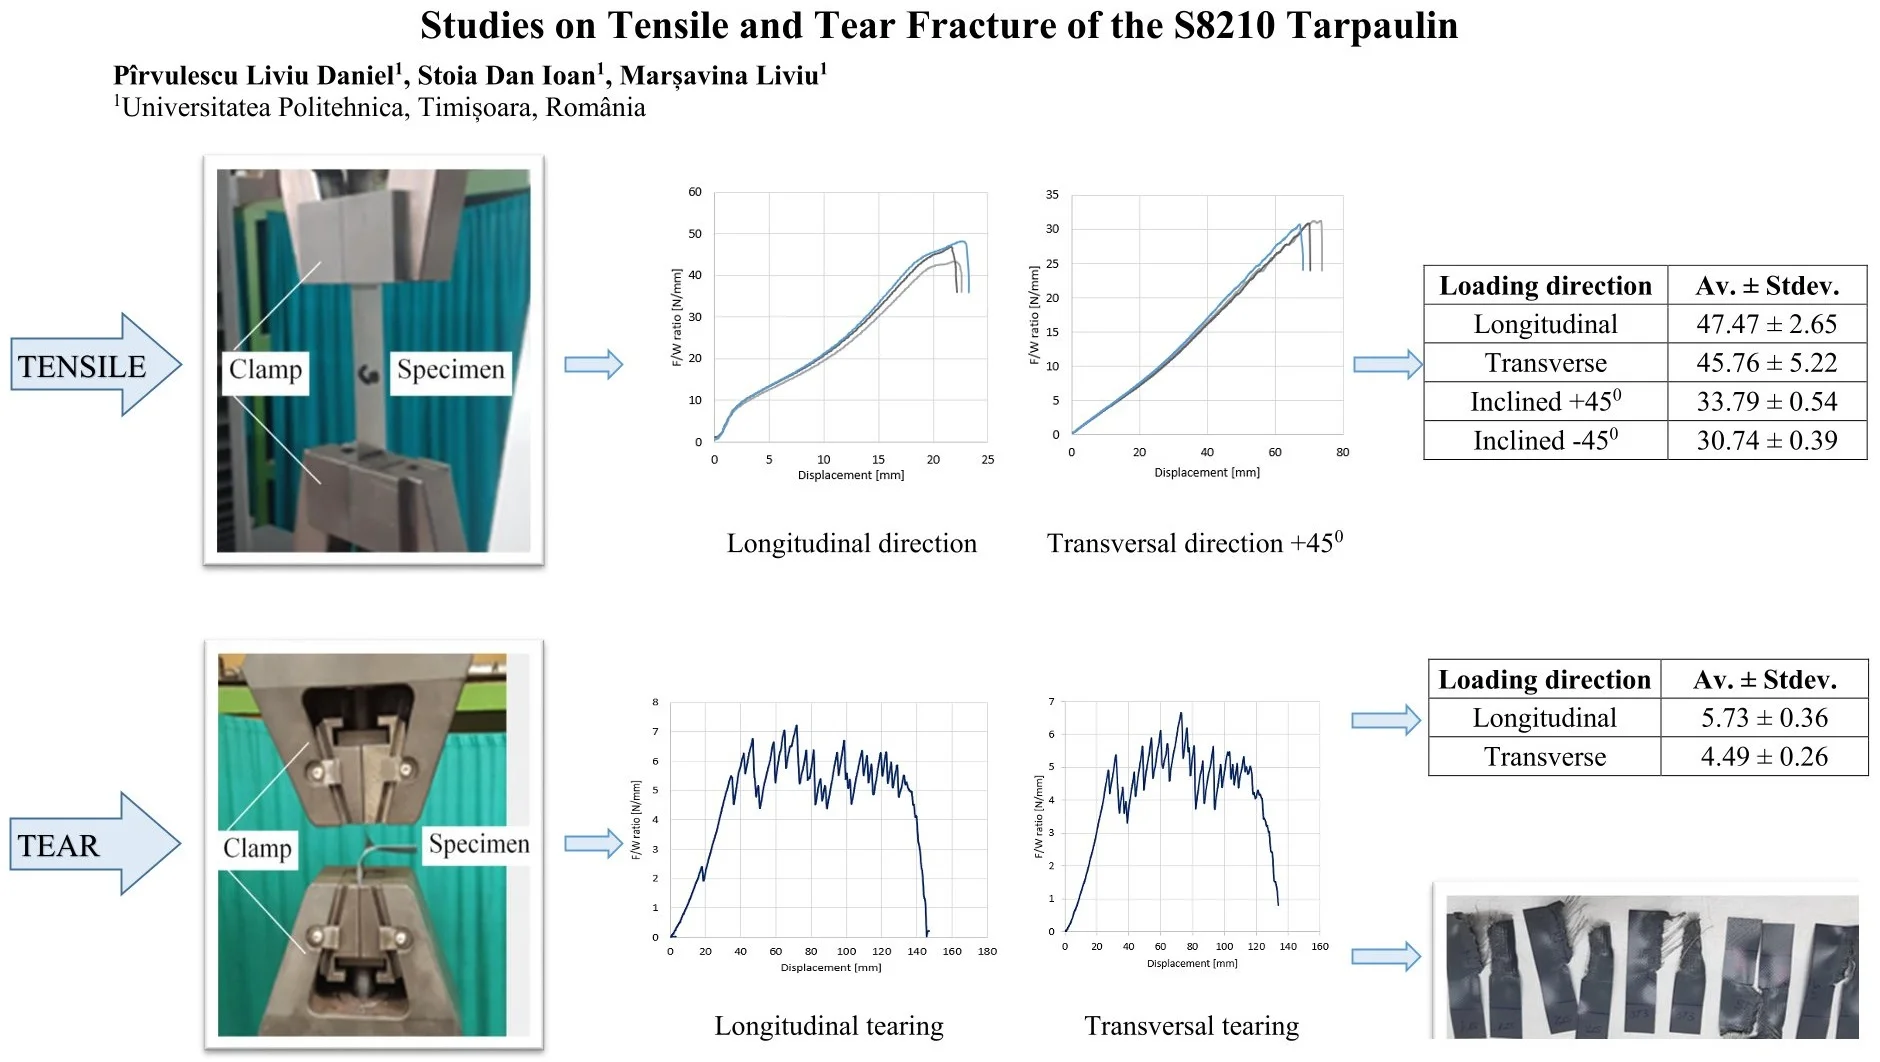 Studies on tensile and tear fracture of the S8210 tarpaulin